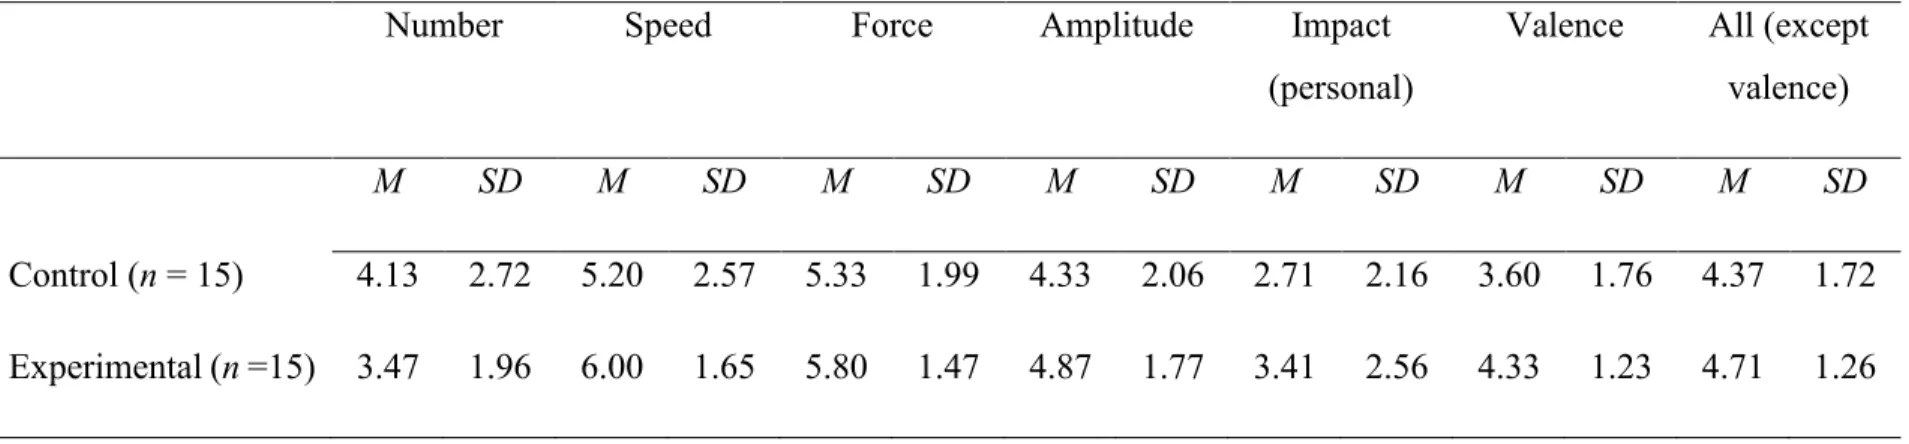 Table 1.3. Means and standard deviations for individual items of Perception of change scale accordingly to experimental condition in  Study 2 (N = 30)